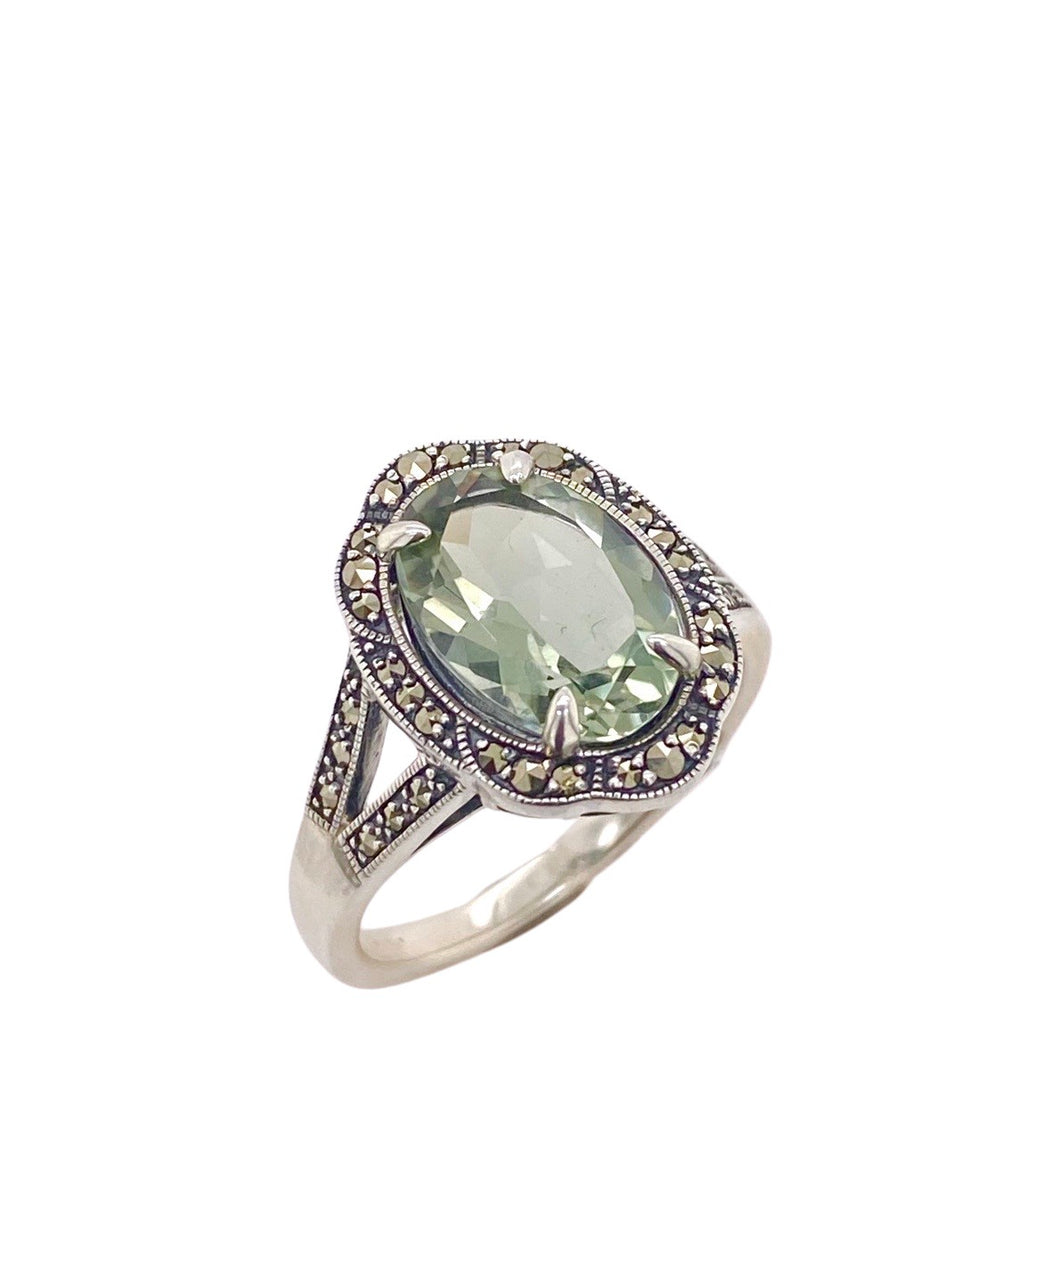 Sterling Silver Marcasite and Prasiolite Ring. AM18-1072